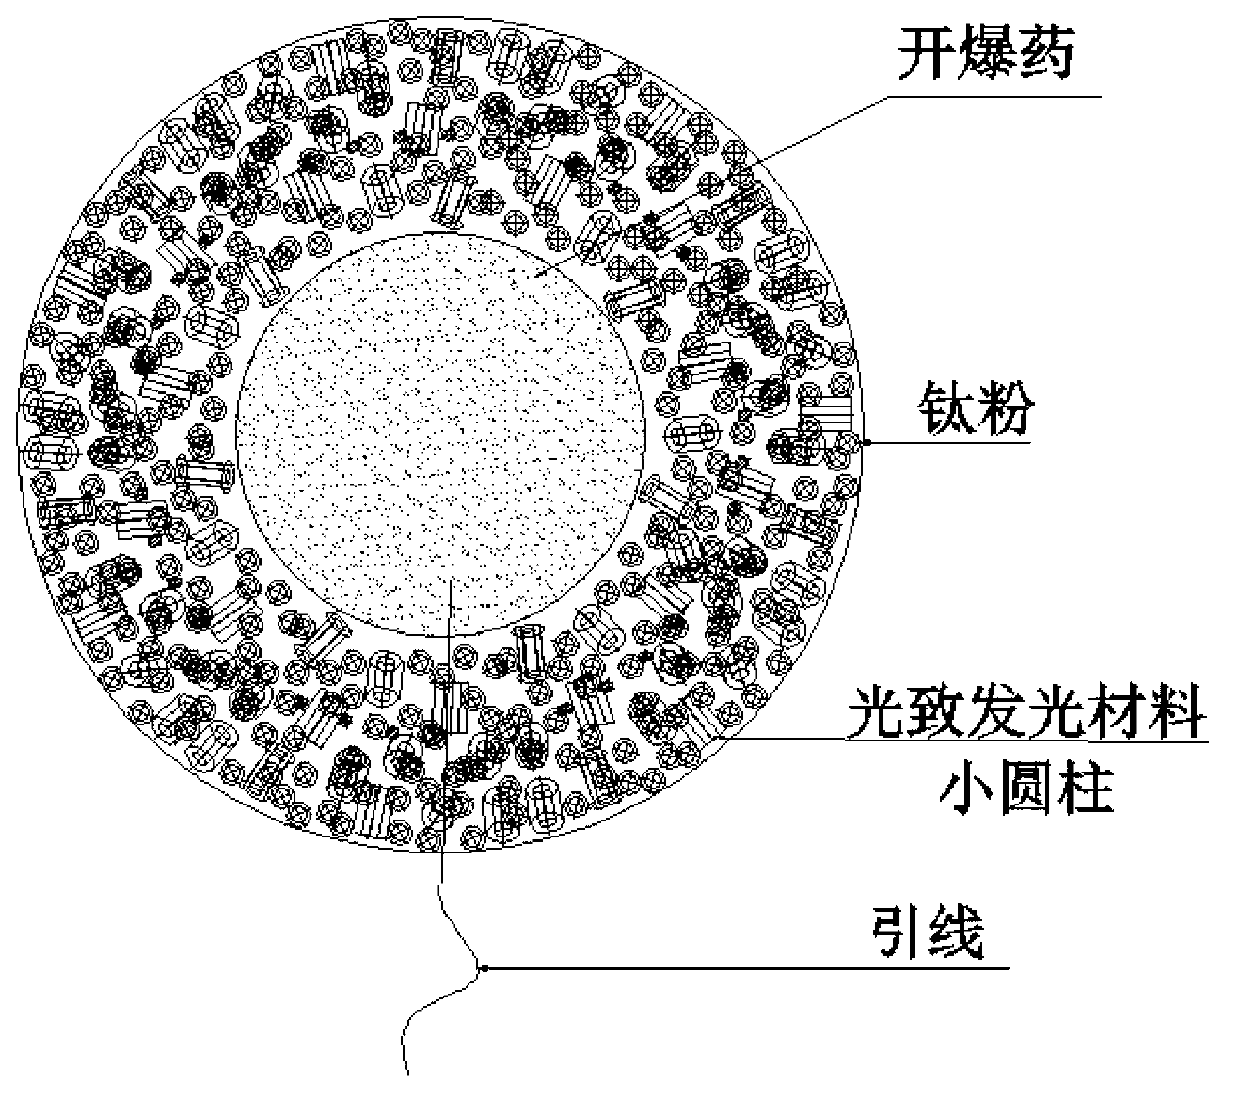 Multicolor cold-firework reagent and manufacturing method of cold fireworks